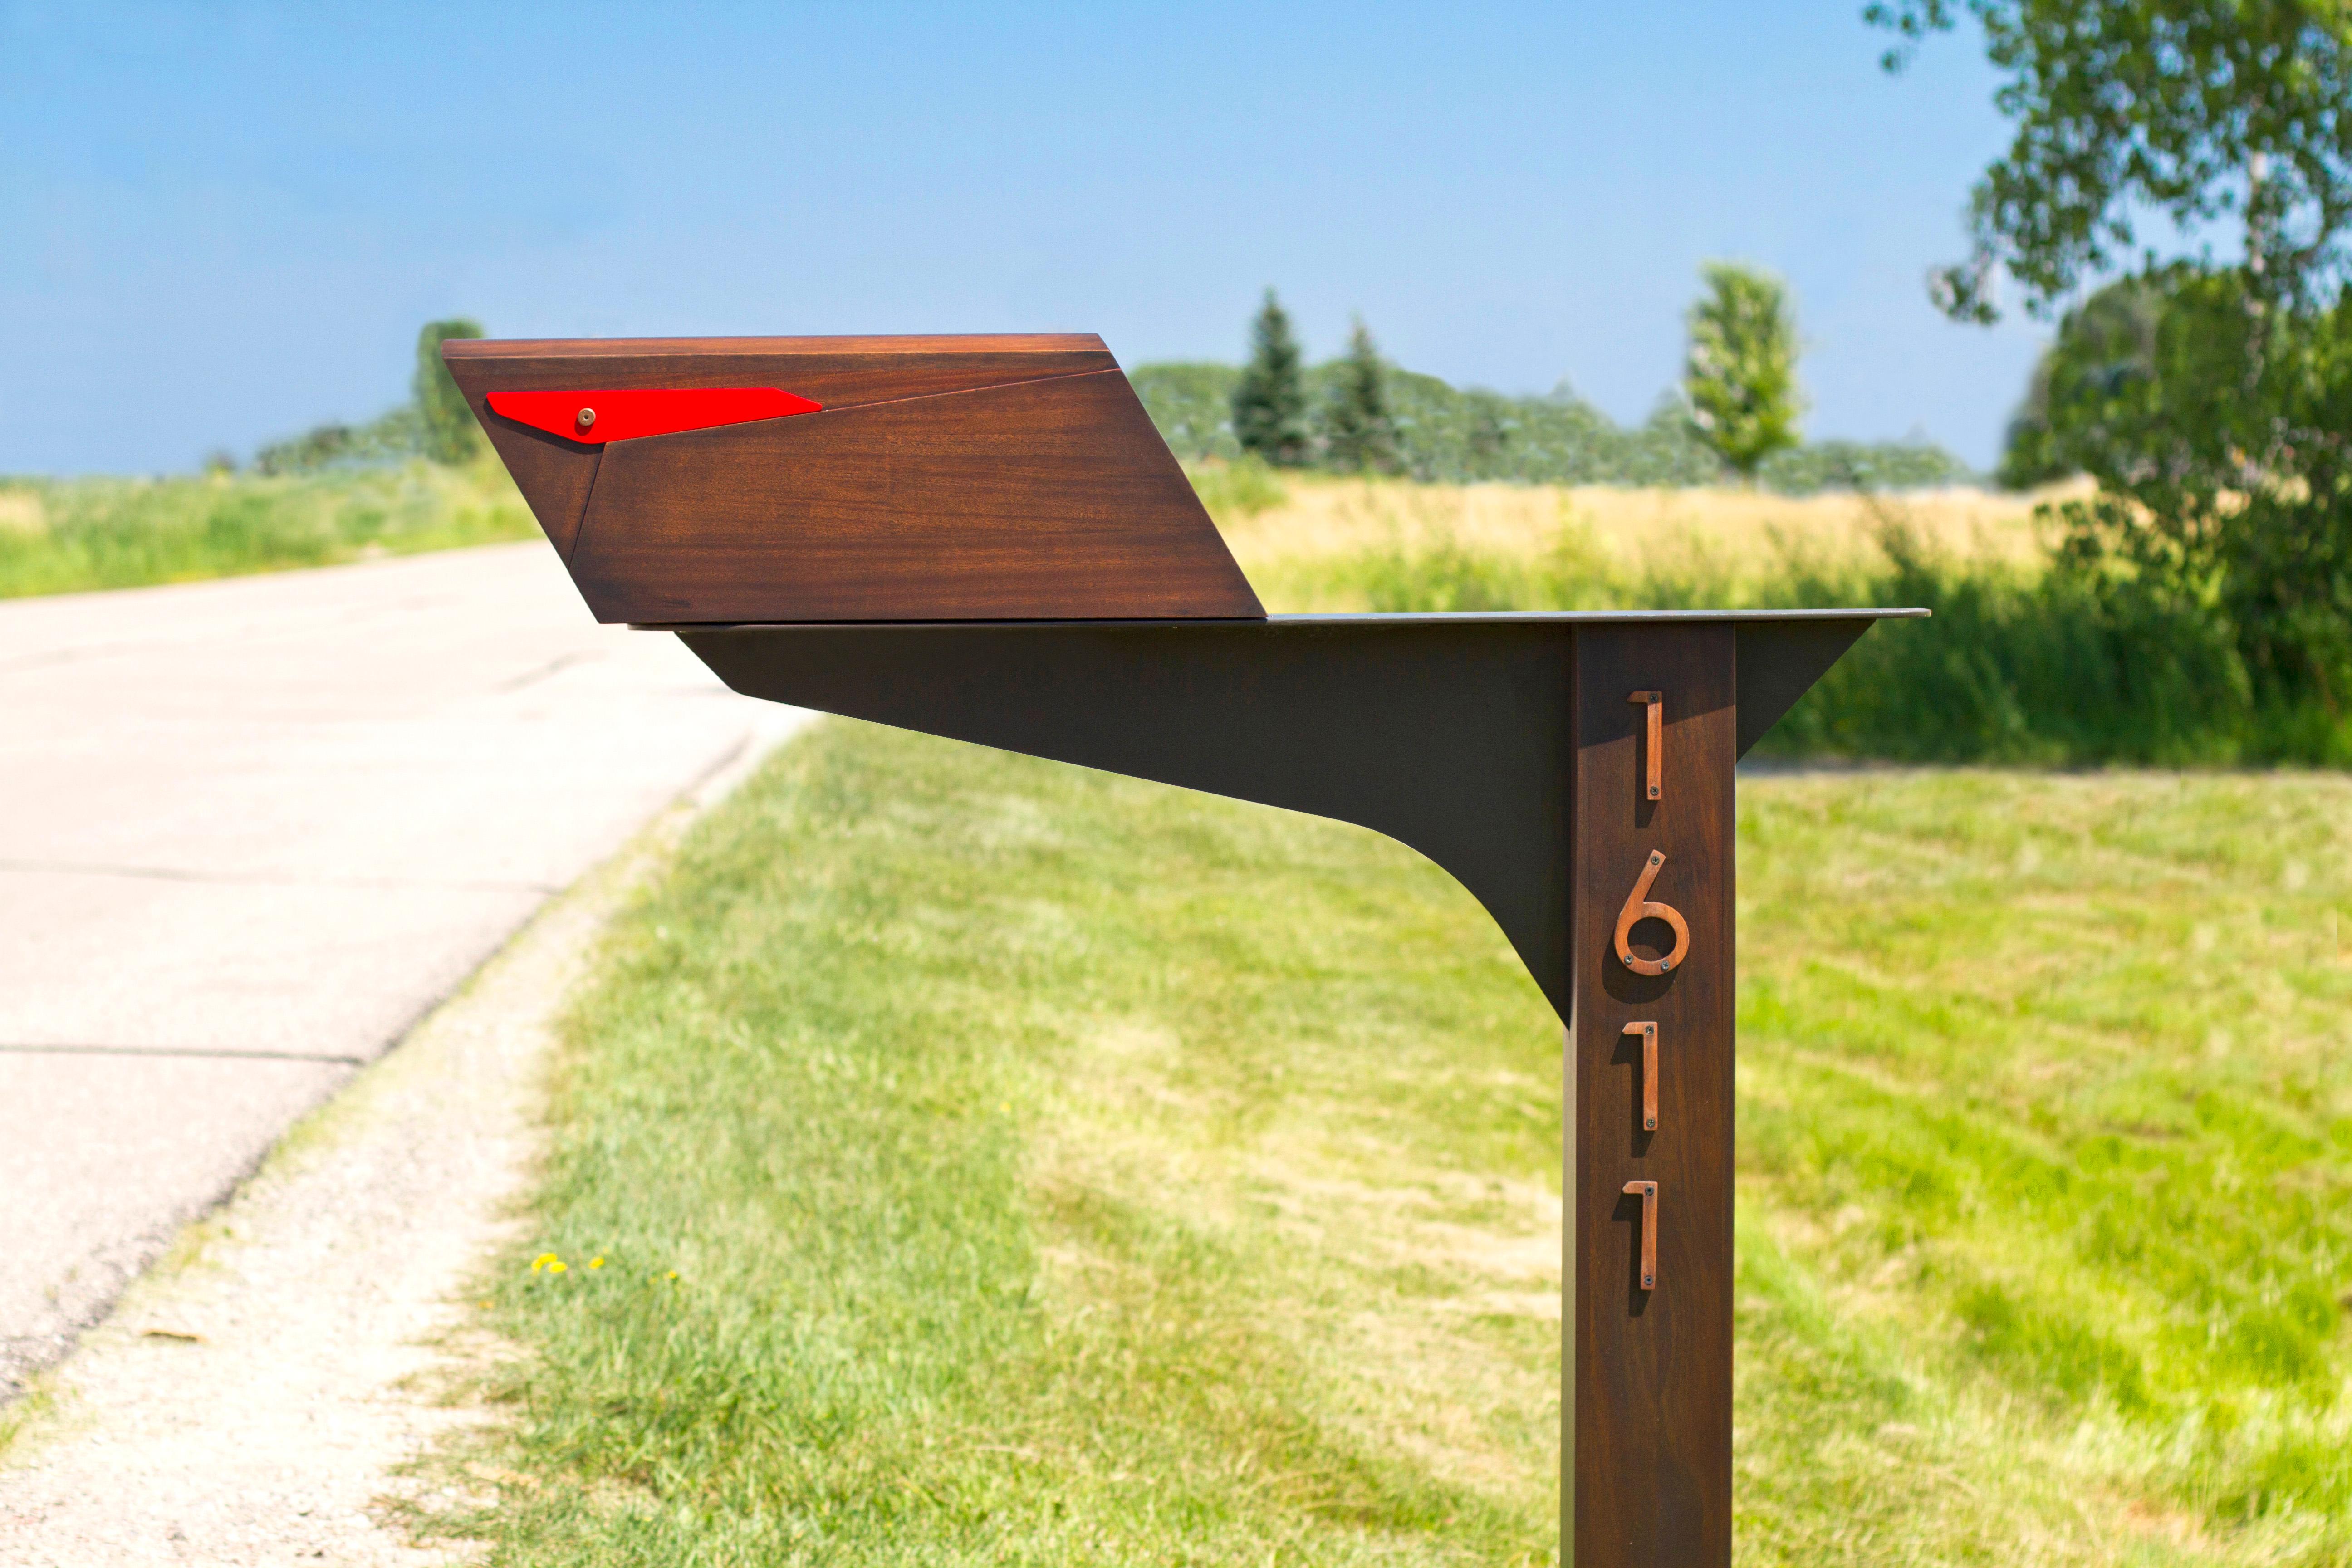 Mailboxes are in much need of redesign, and Wooda’s Postale fits the bill. Being that we are Wisconsin based and have to deal with winter, we decided to cantilever our mailbox far from the post to allow ample room for snow plows, while also placing